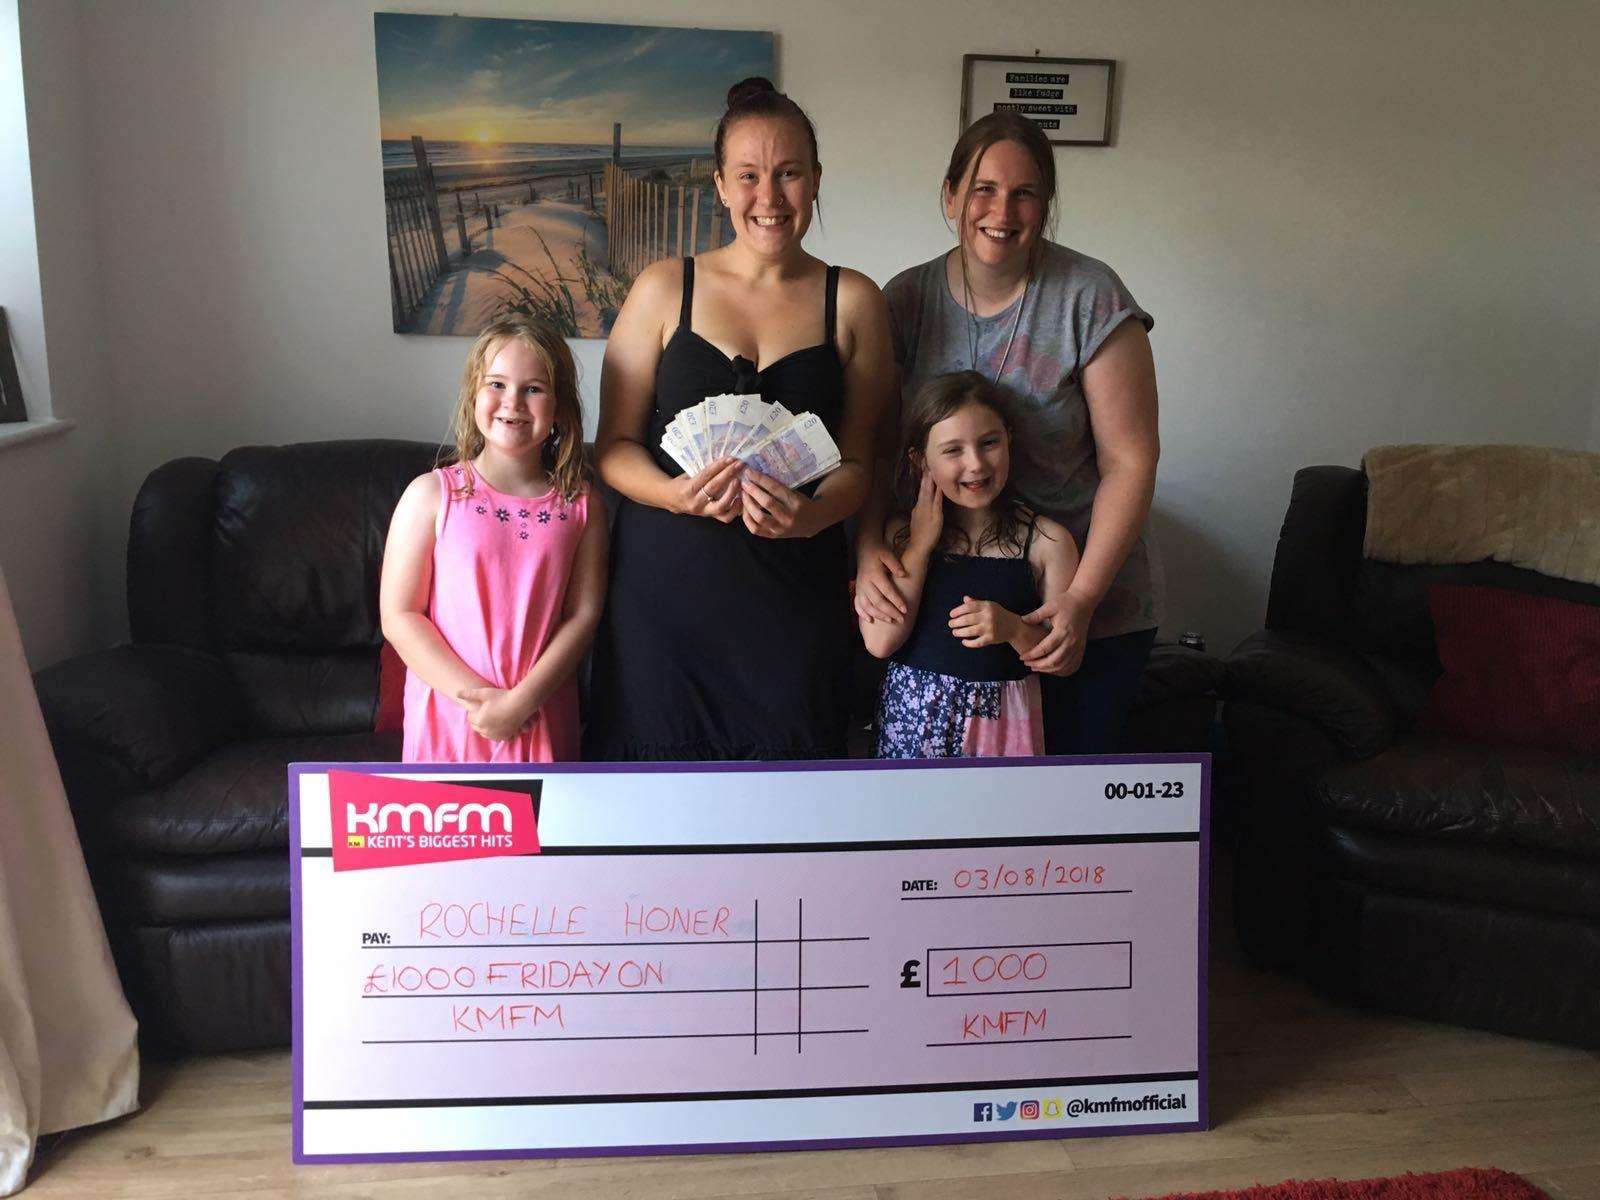 Rochelle Honer and her family, from Maidstone, won on Thousand Pound Friday